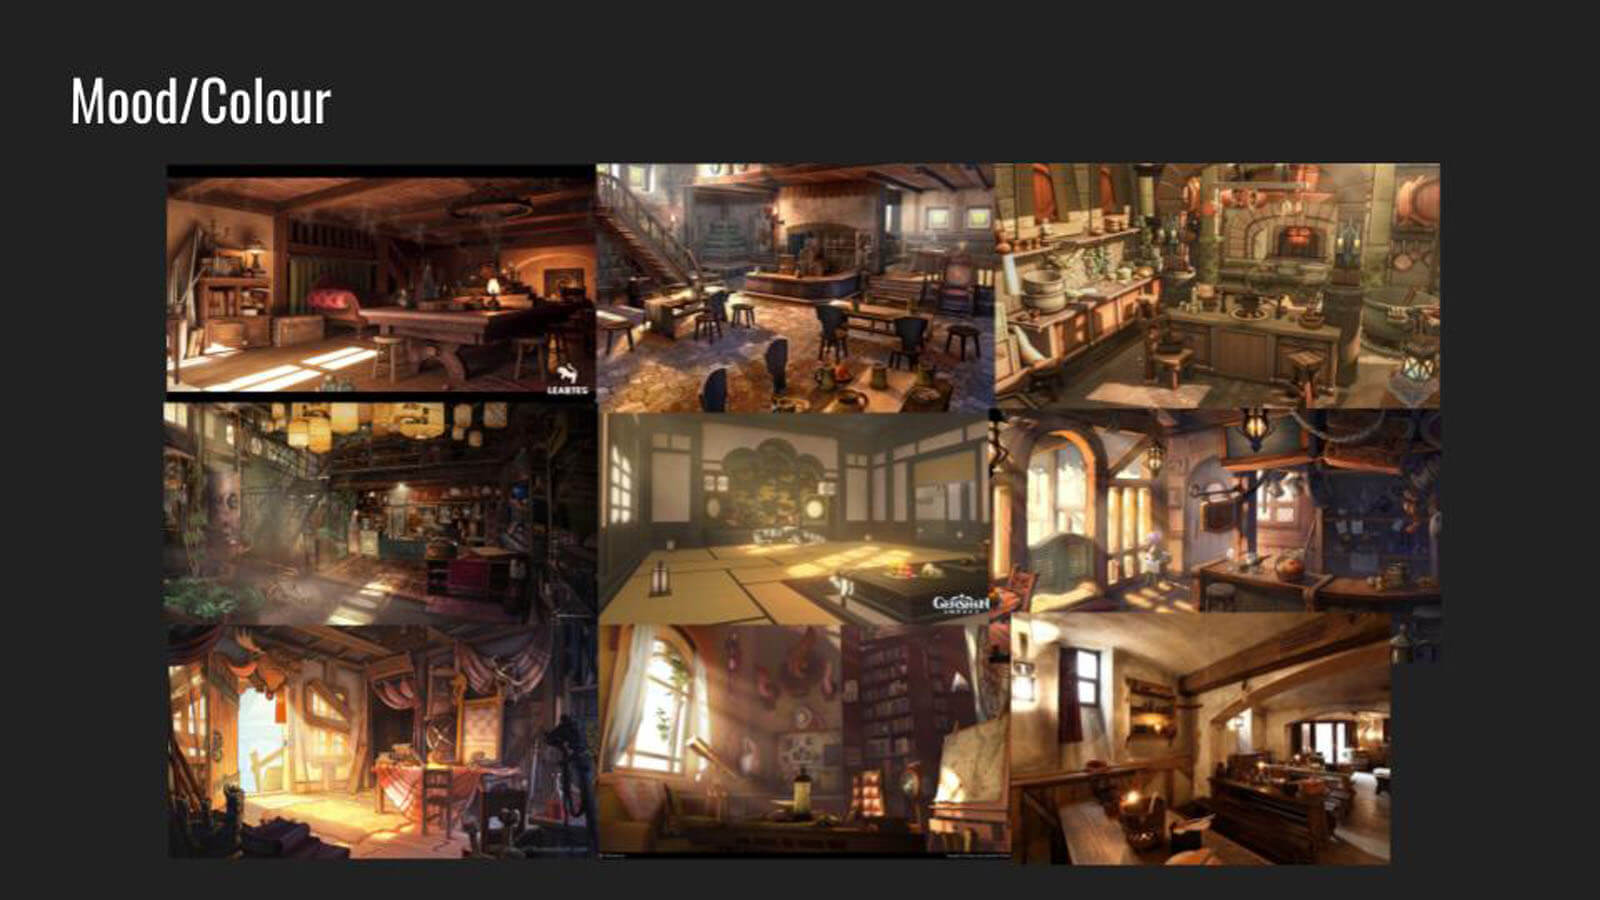 Various pieces of concept art focusing on the mood and coloring of different scenes.